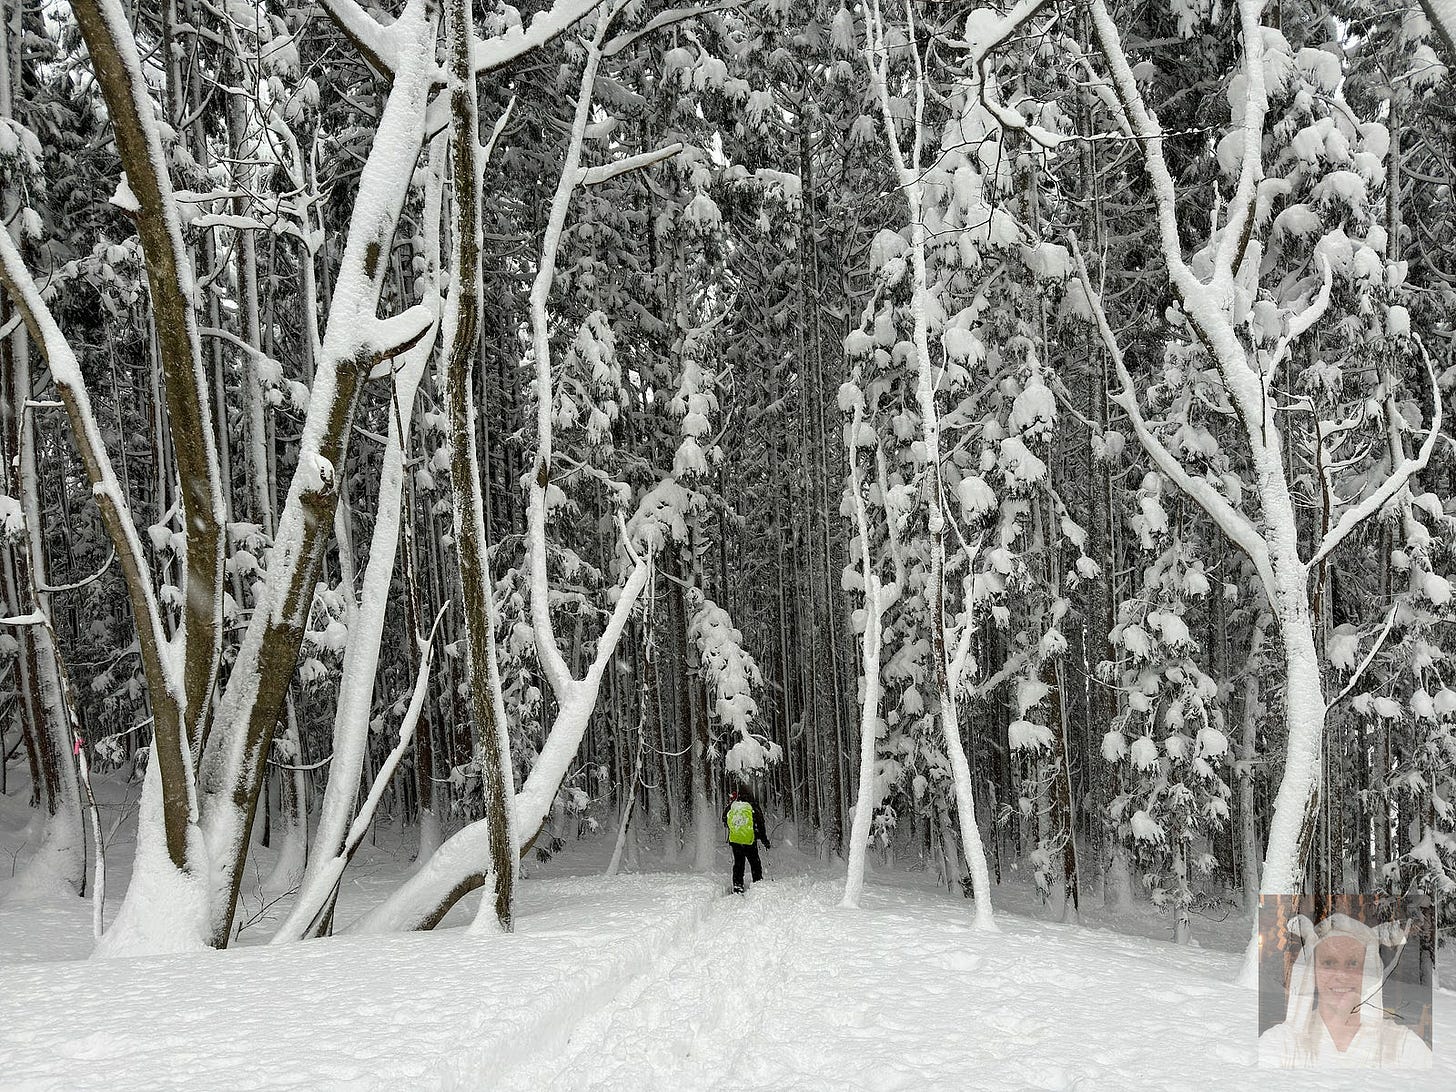 A man with a green bag cover enters a dark cedar forest completely enveloped in snow on Shirotaro-yama, Oguni-machi, Yamagata Prefecture, Japan.